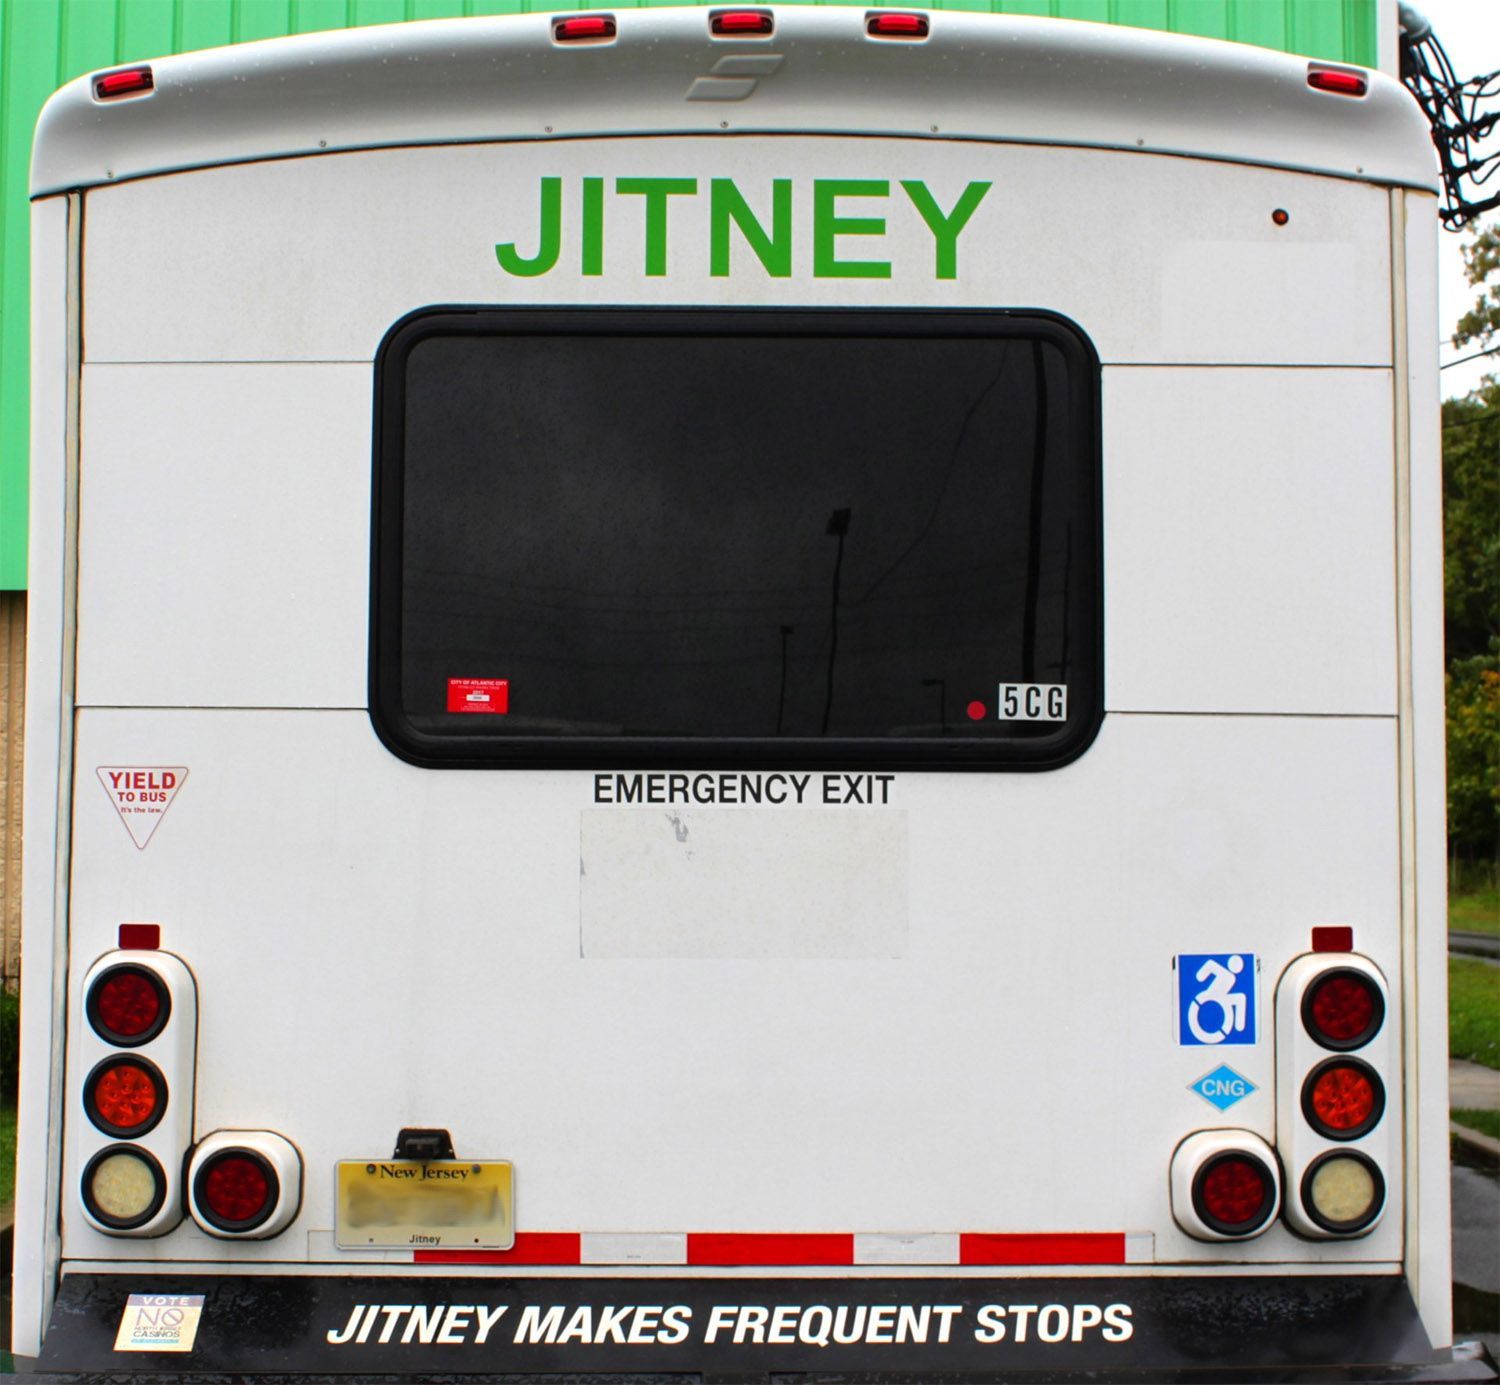 The rear side of our Starcraft model Jitney